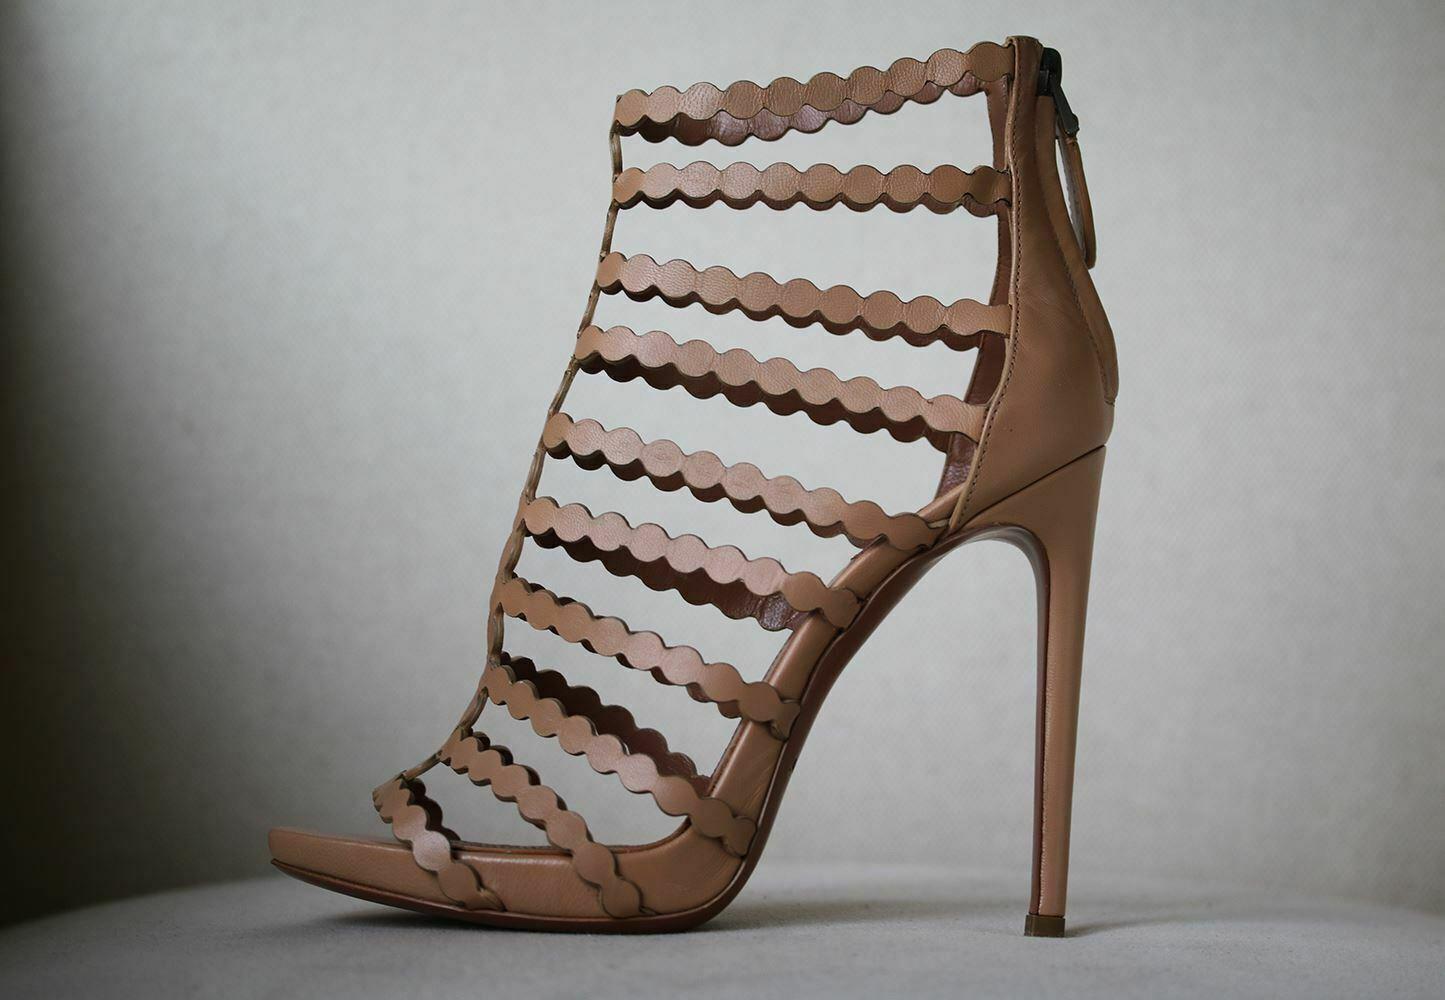 Neutral-hued sandals are supremely versatile. This pair by Alaïa is crafted in Italy using the label's signature laser-cutting technique. Heel measures approximately 115mm/ 4.5 inches with a 20mm/ 1 inch platform. Sand leather. Zip fastening along